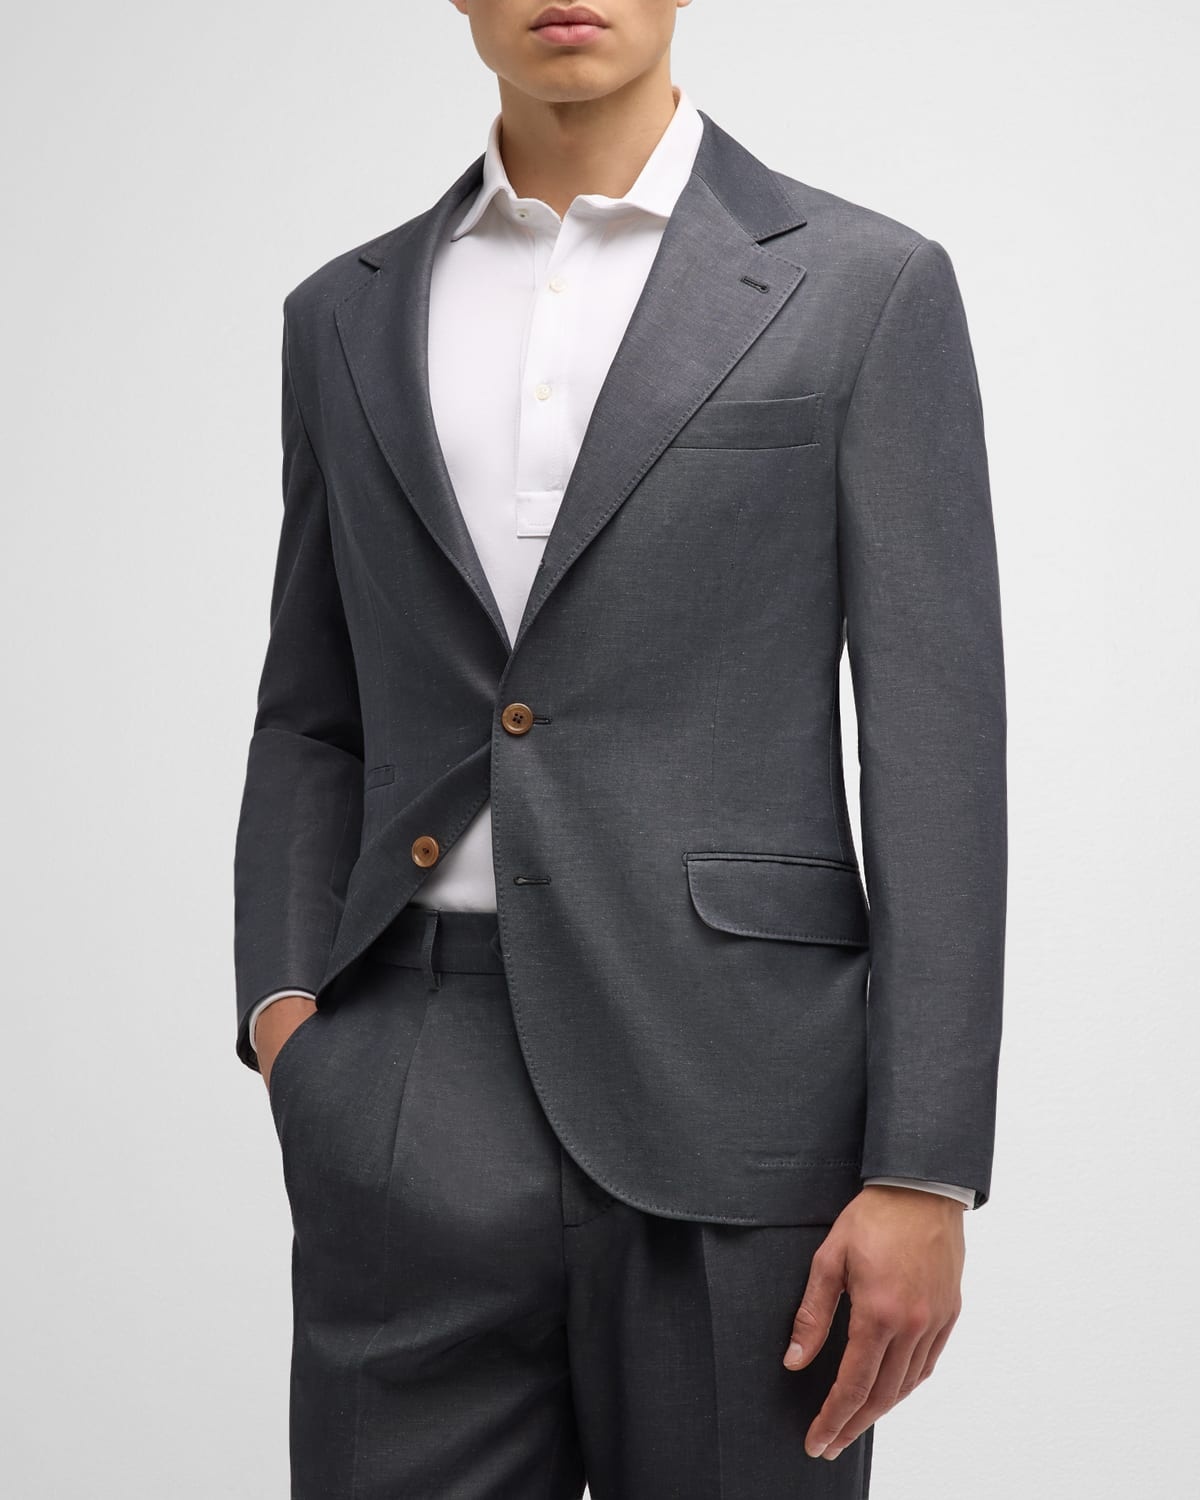 Men's Wool and Linen Three-Button Suit - 1